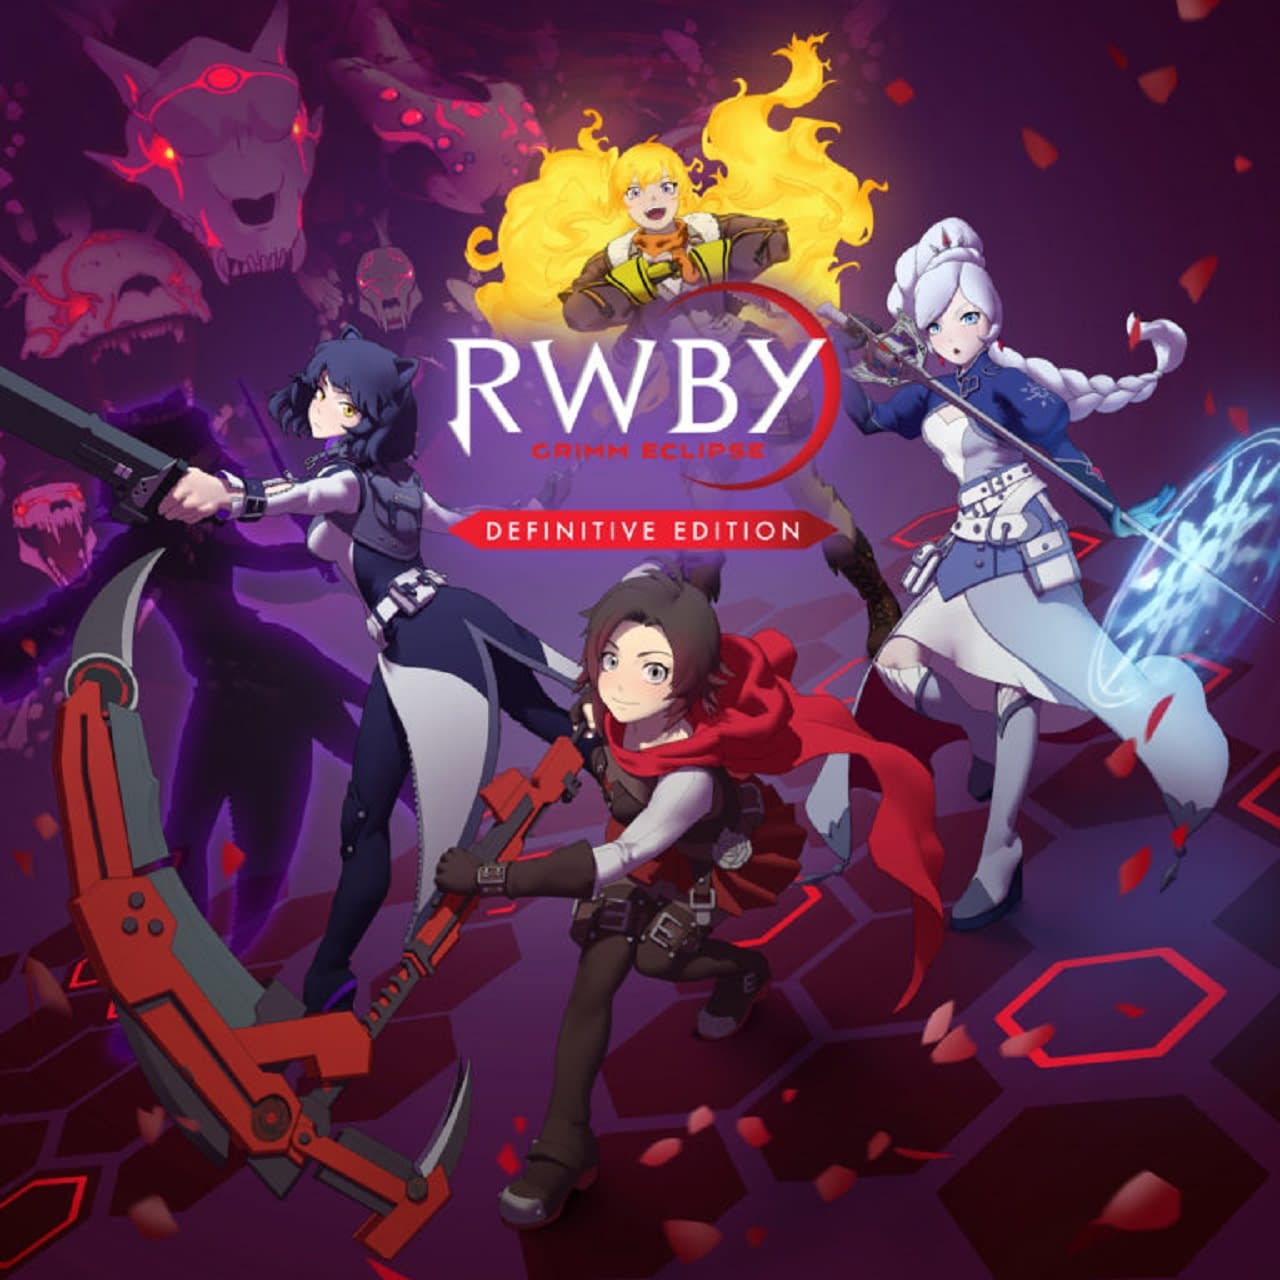 Rwby Grimm Eclipse Definitive Edition Is Coming To Switch This May